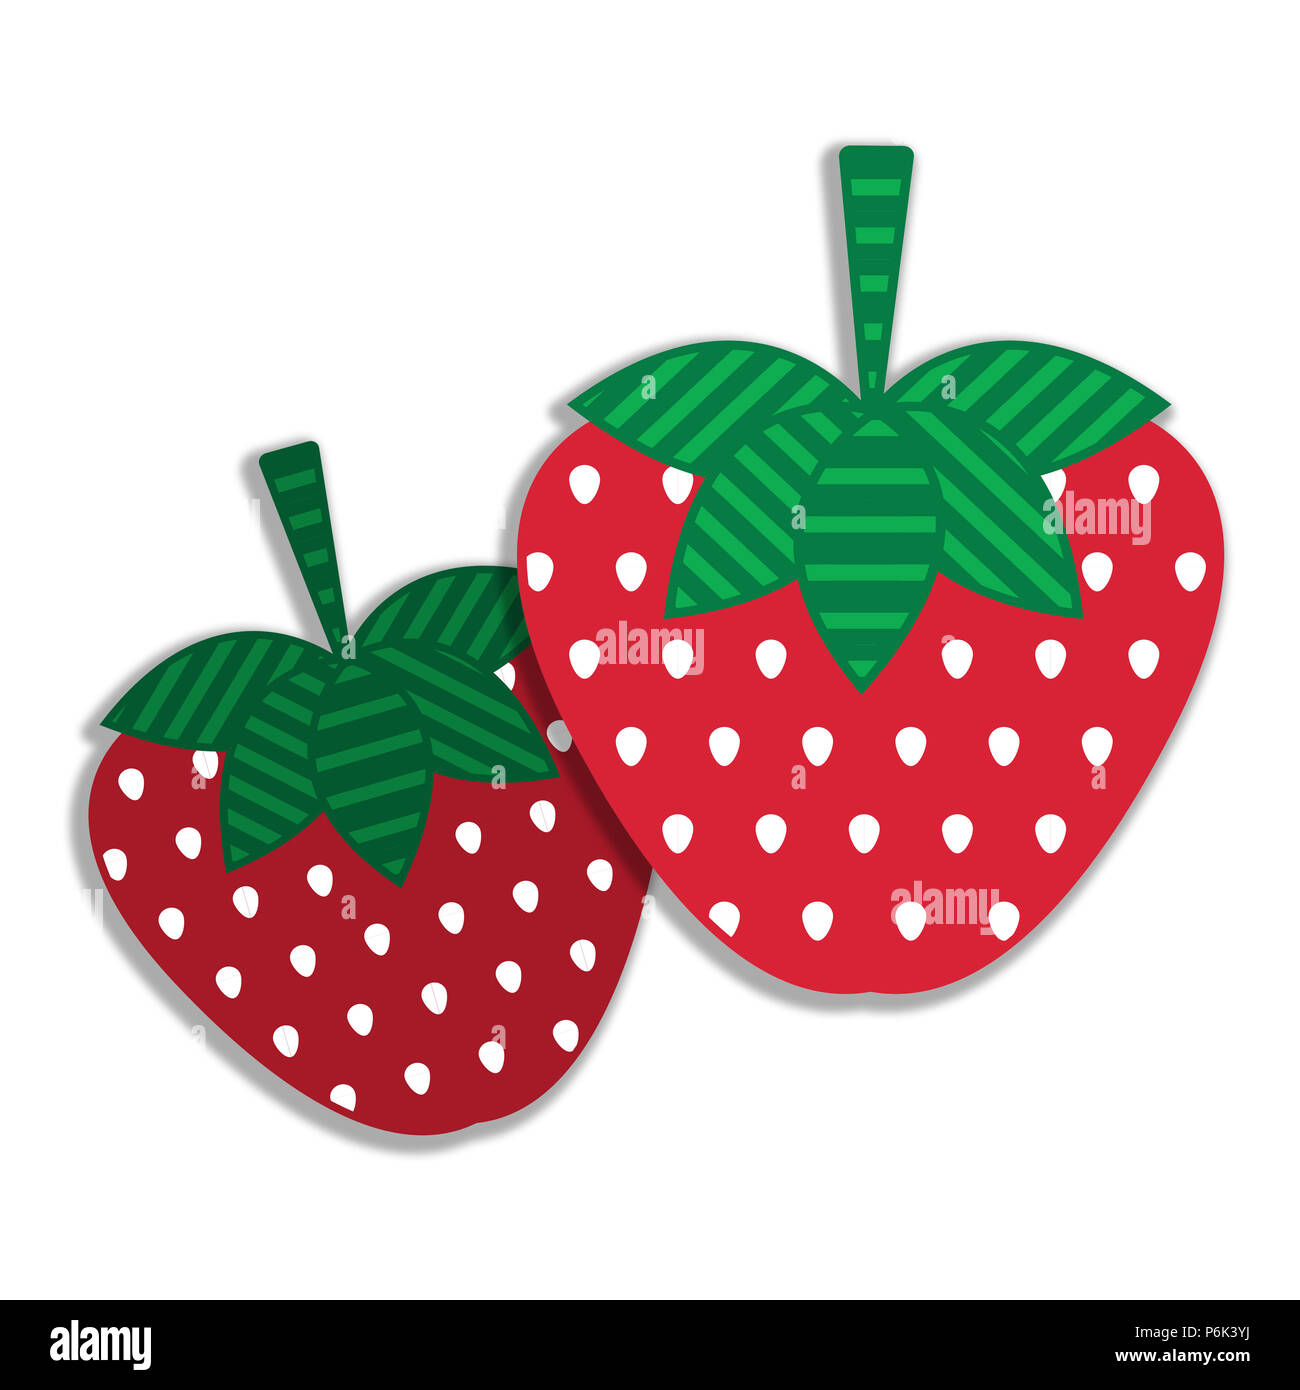 Illustration of two strawberries against a white background. Dots and stripes pattern. Drop shadow. Modern. Stock Photo